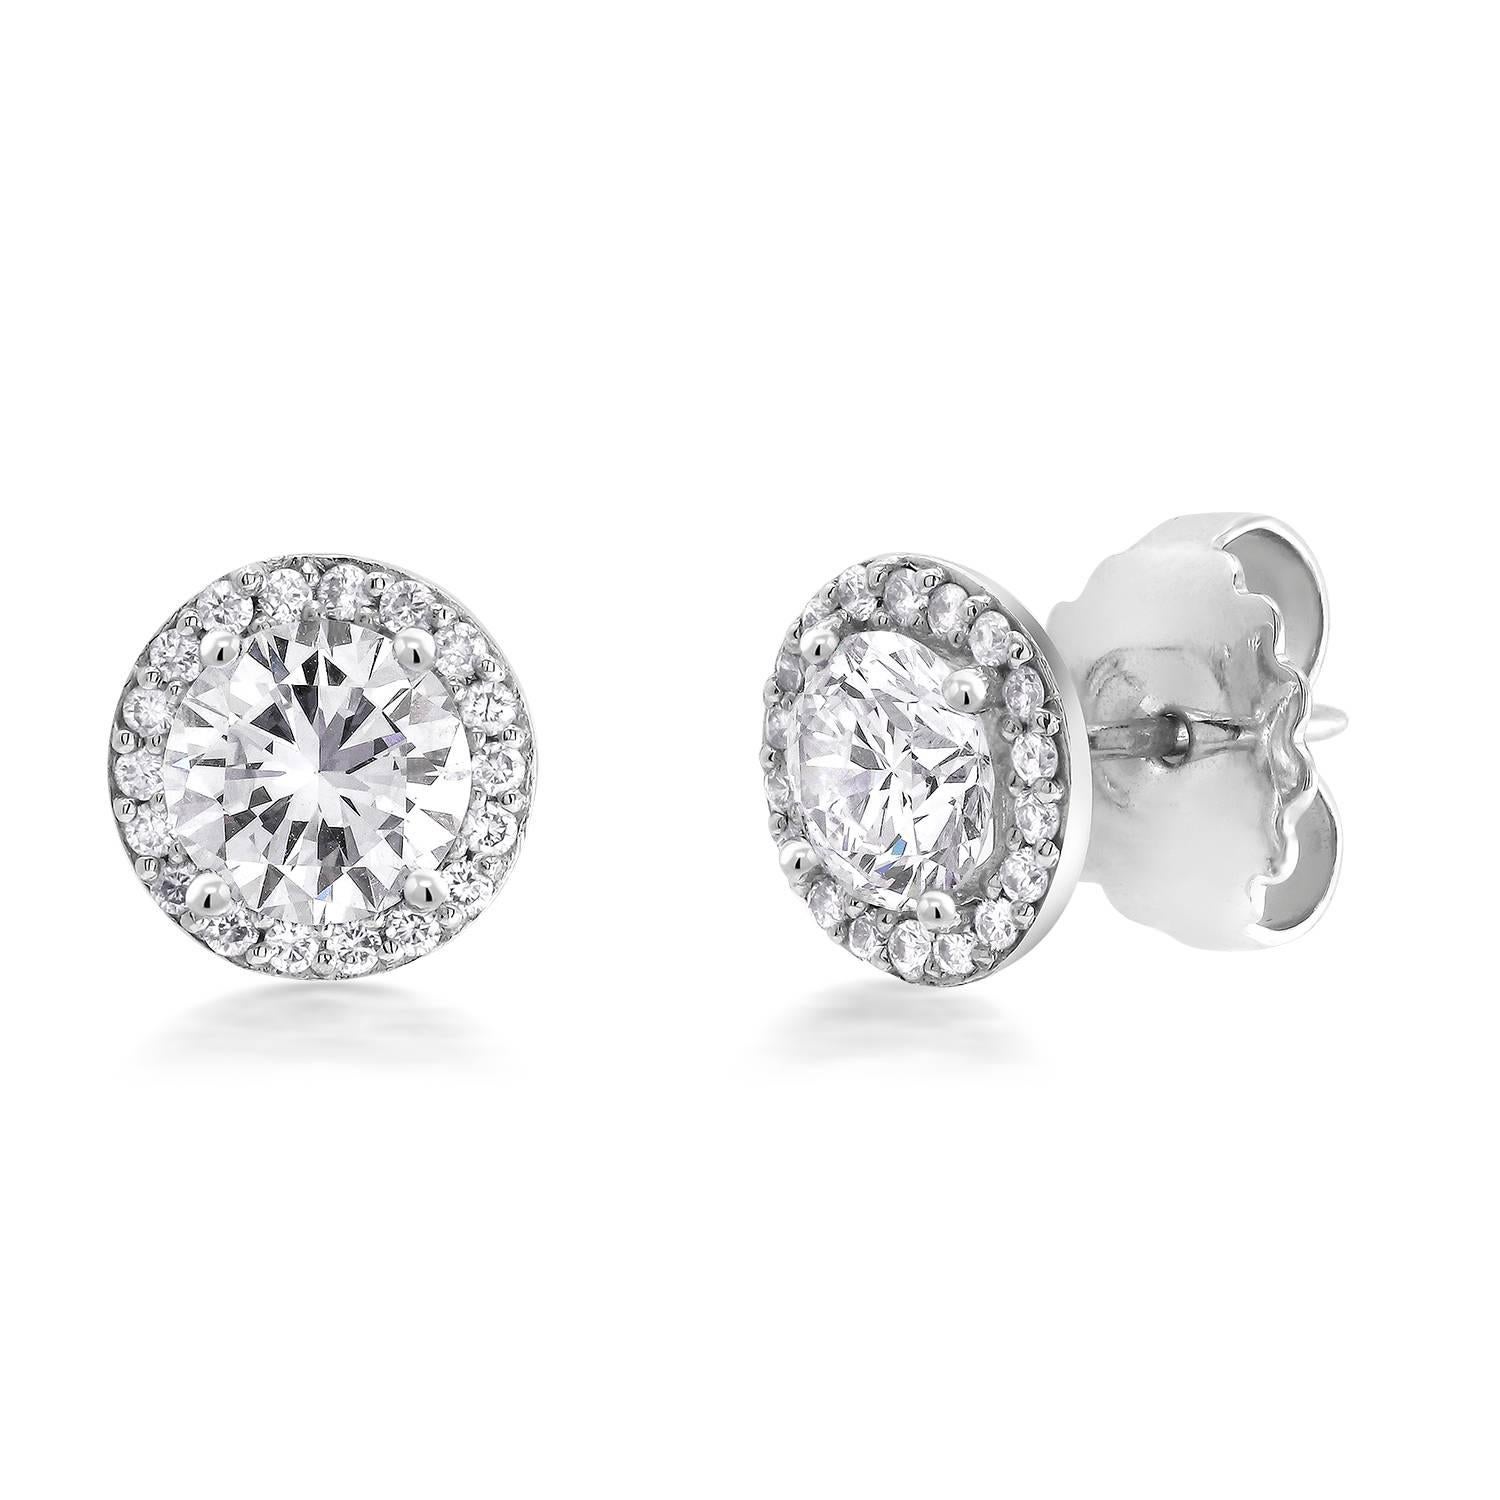 Featuring 18k white gold halo diamond earrings with pave-set diamond custom order ready for your old stud diamond earrings
Earrings are available for pairs from 0.50 to 2 carat center stones
Center stones not included
Diamond weight 0.45